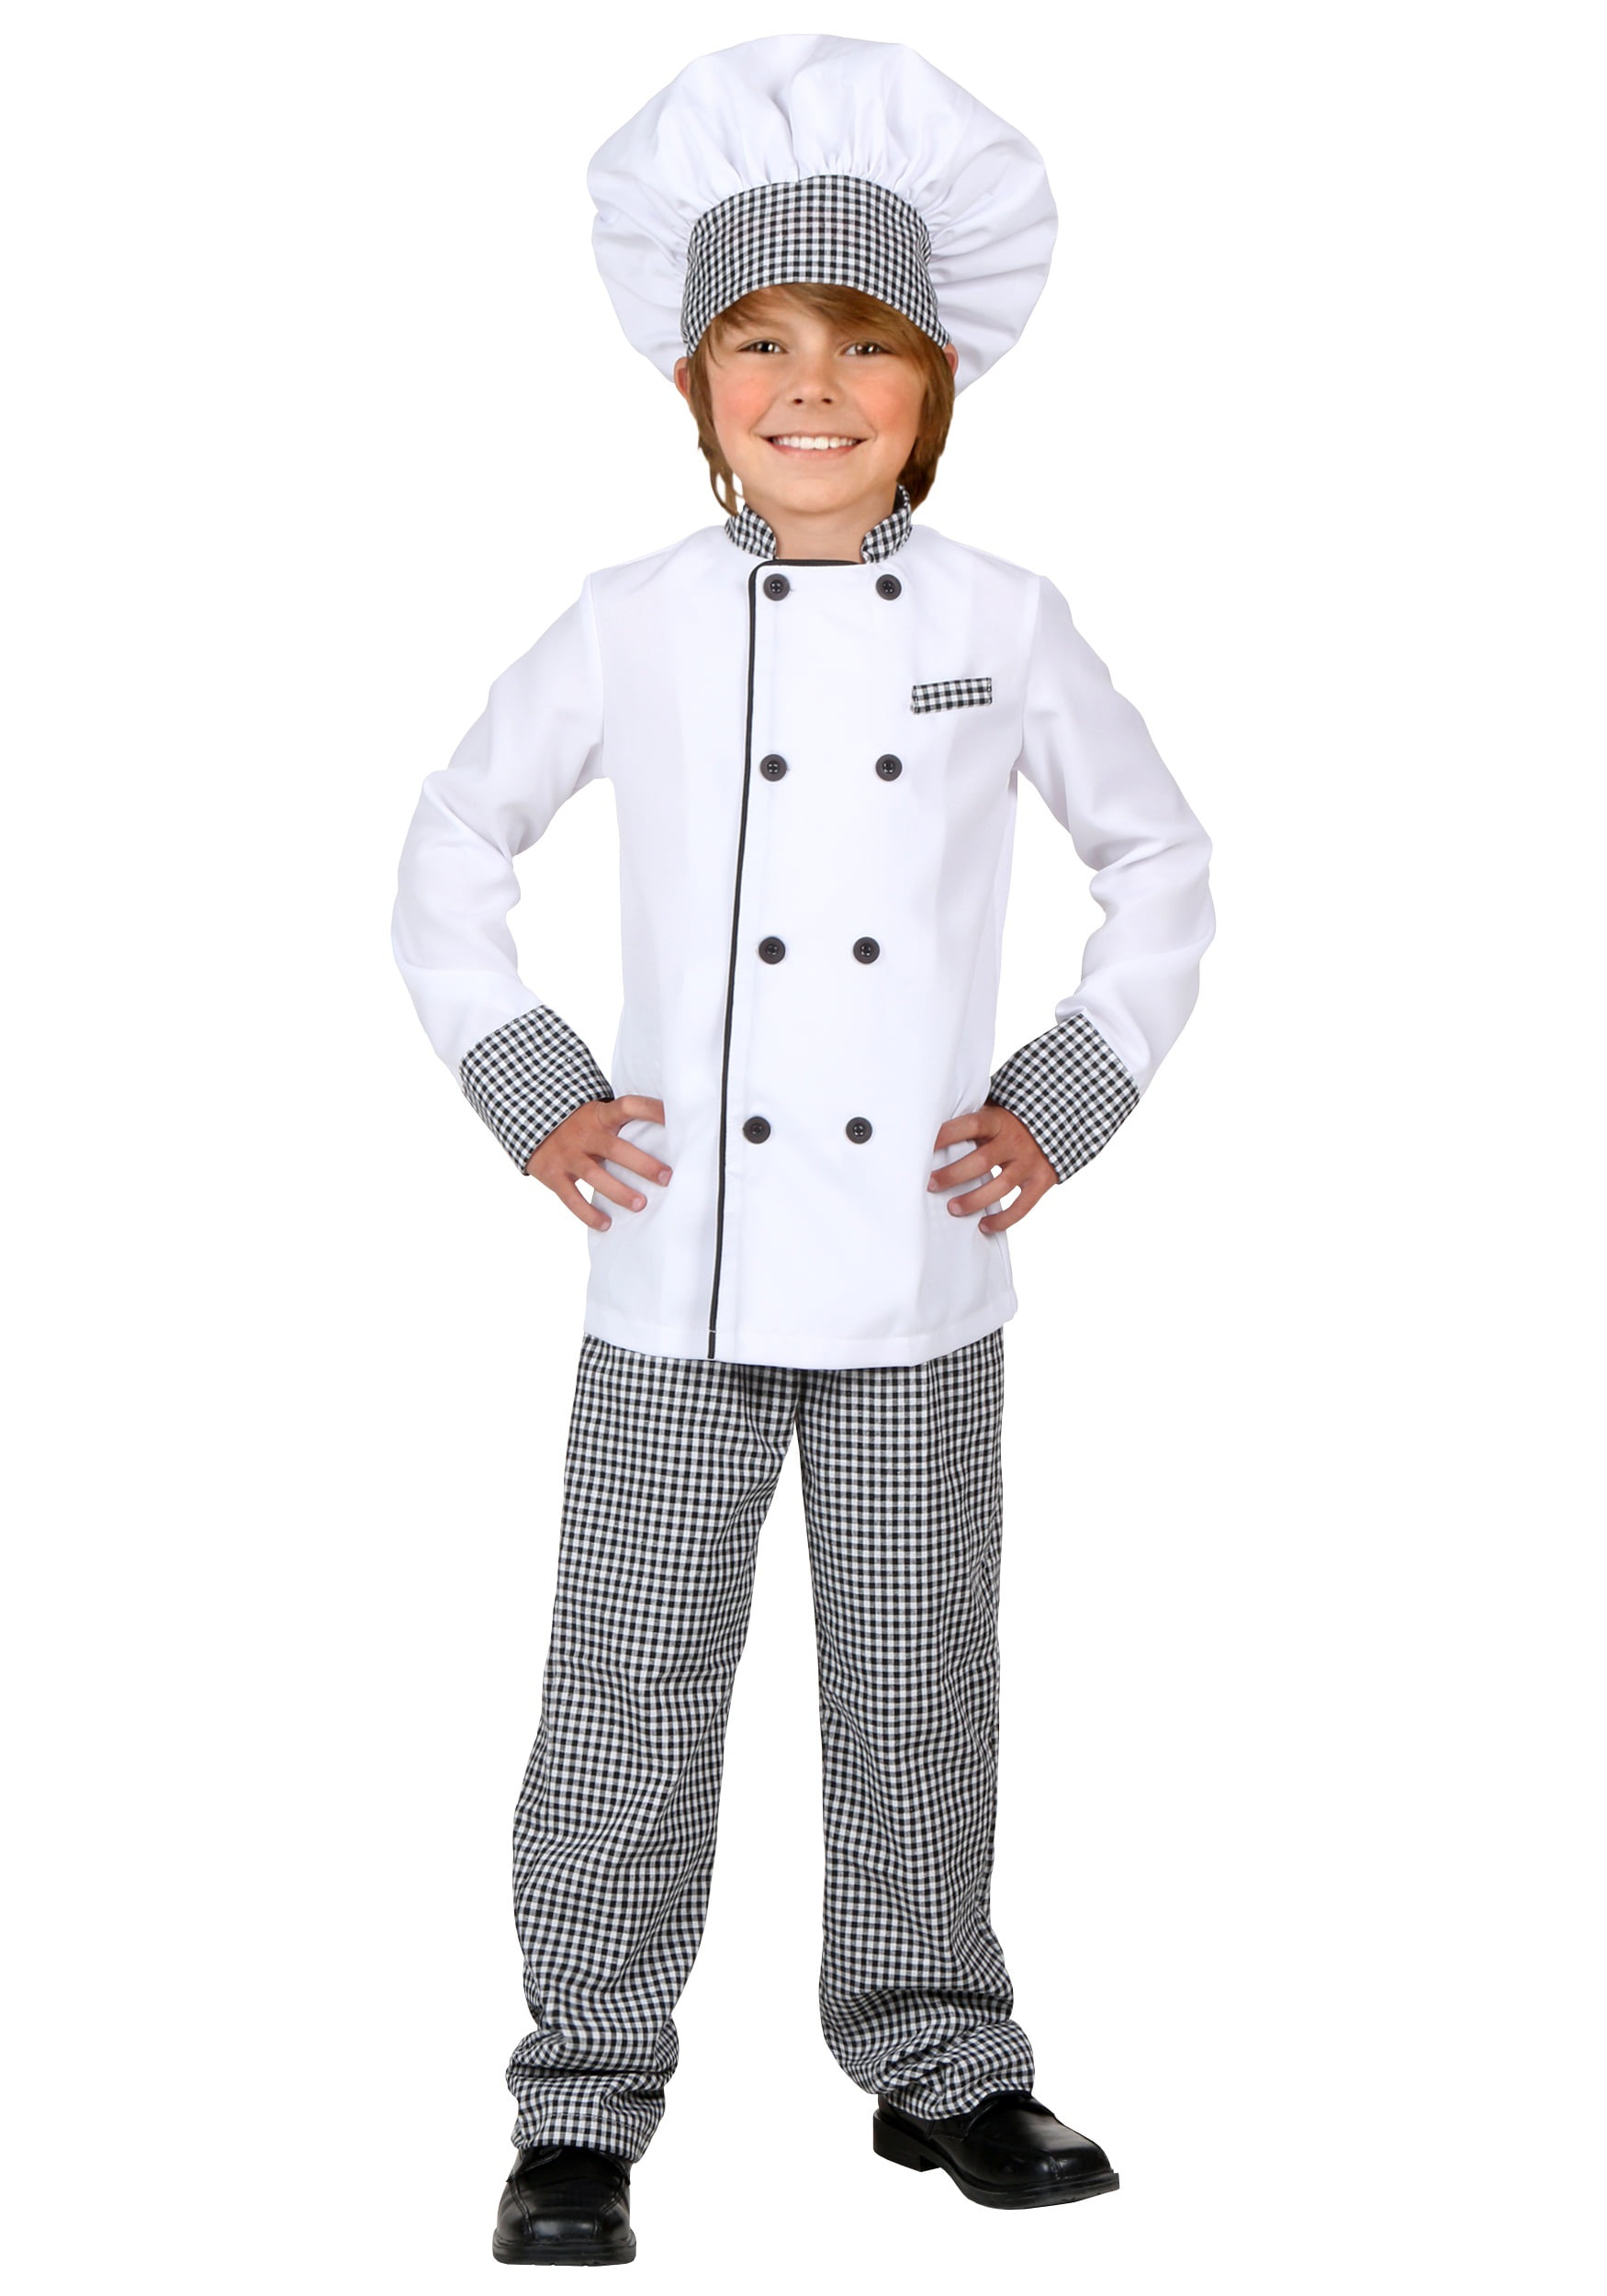 Child Kids Chef Costume Cosplay Party Outfit Fancy Dress Jacket+Apron+Hat 4PCS